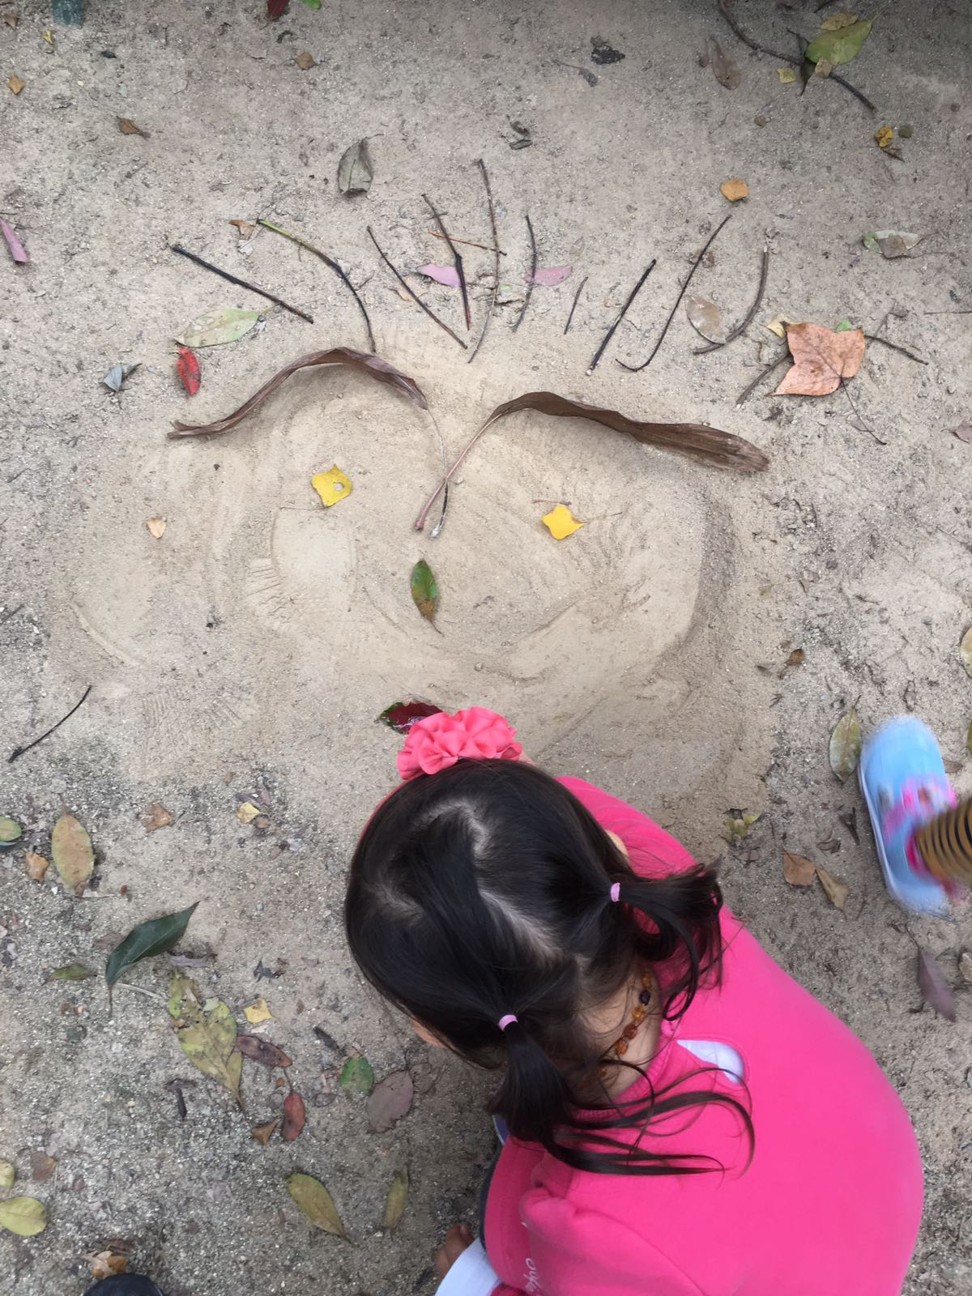 Play&Grow, a research programme run by HKU’s Dr Tanja Sobko, promotes healthy eating and active playtime for preschool children by connecting them to nature.